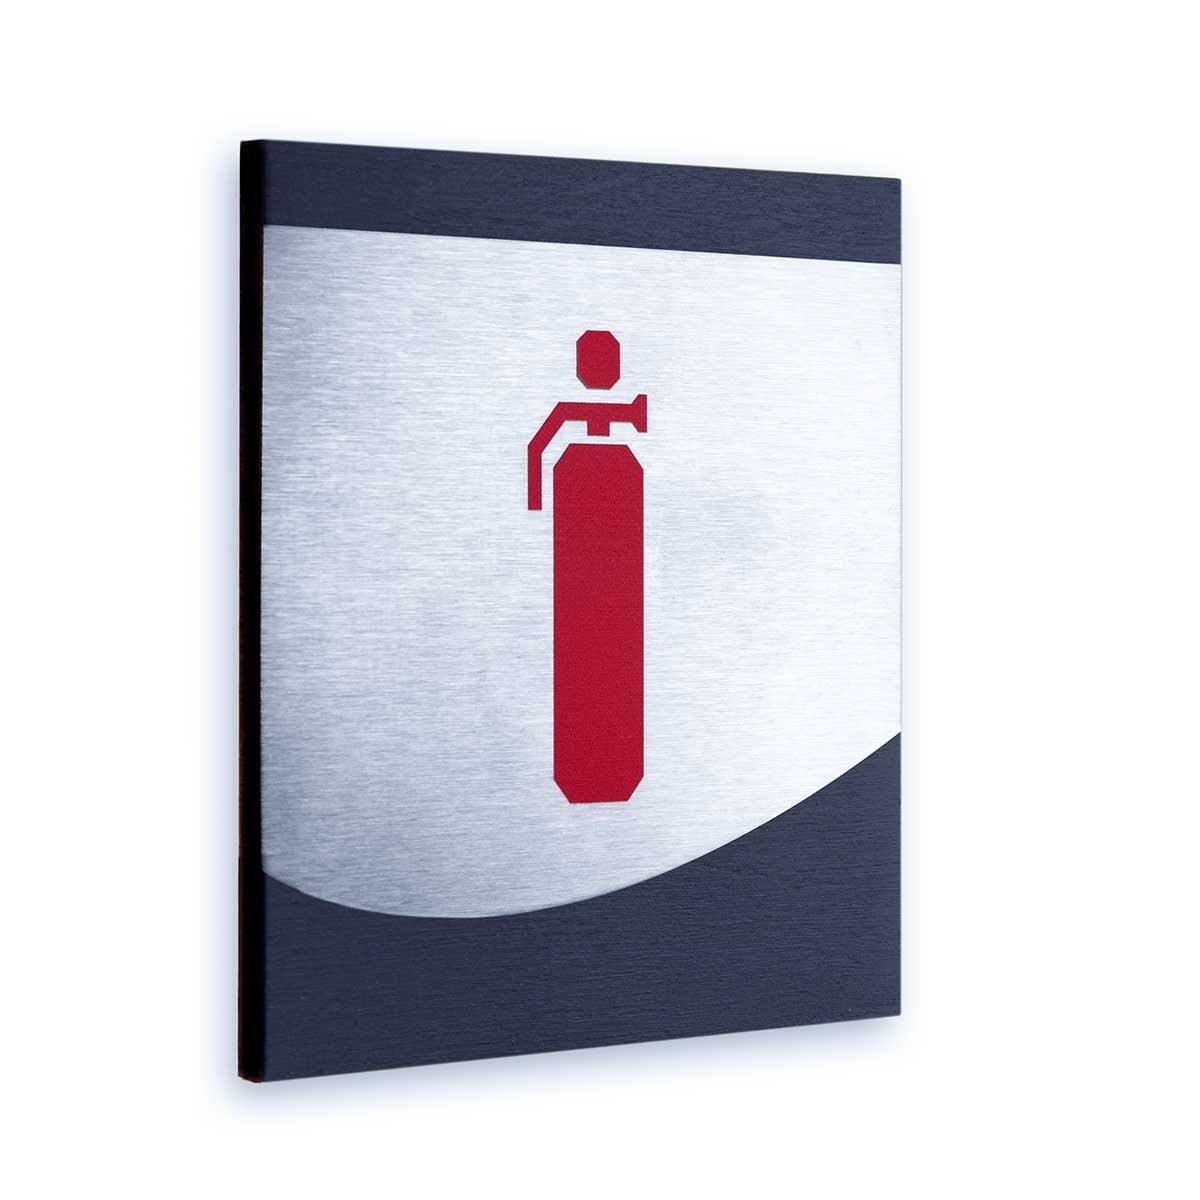 Steel Extinguisher Fire Sign Information signs Anthracite Gray Bsign